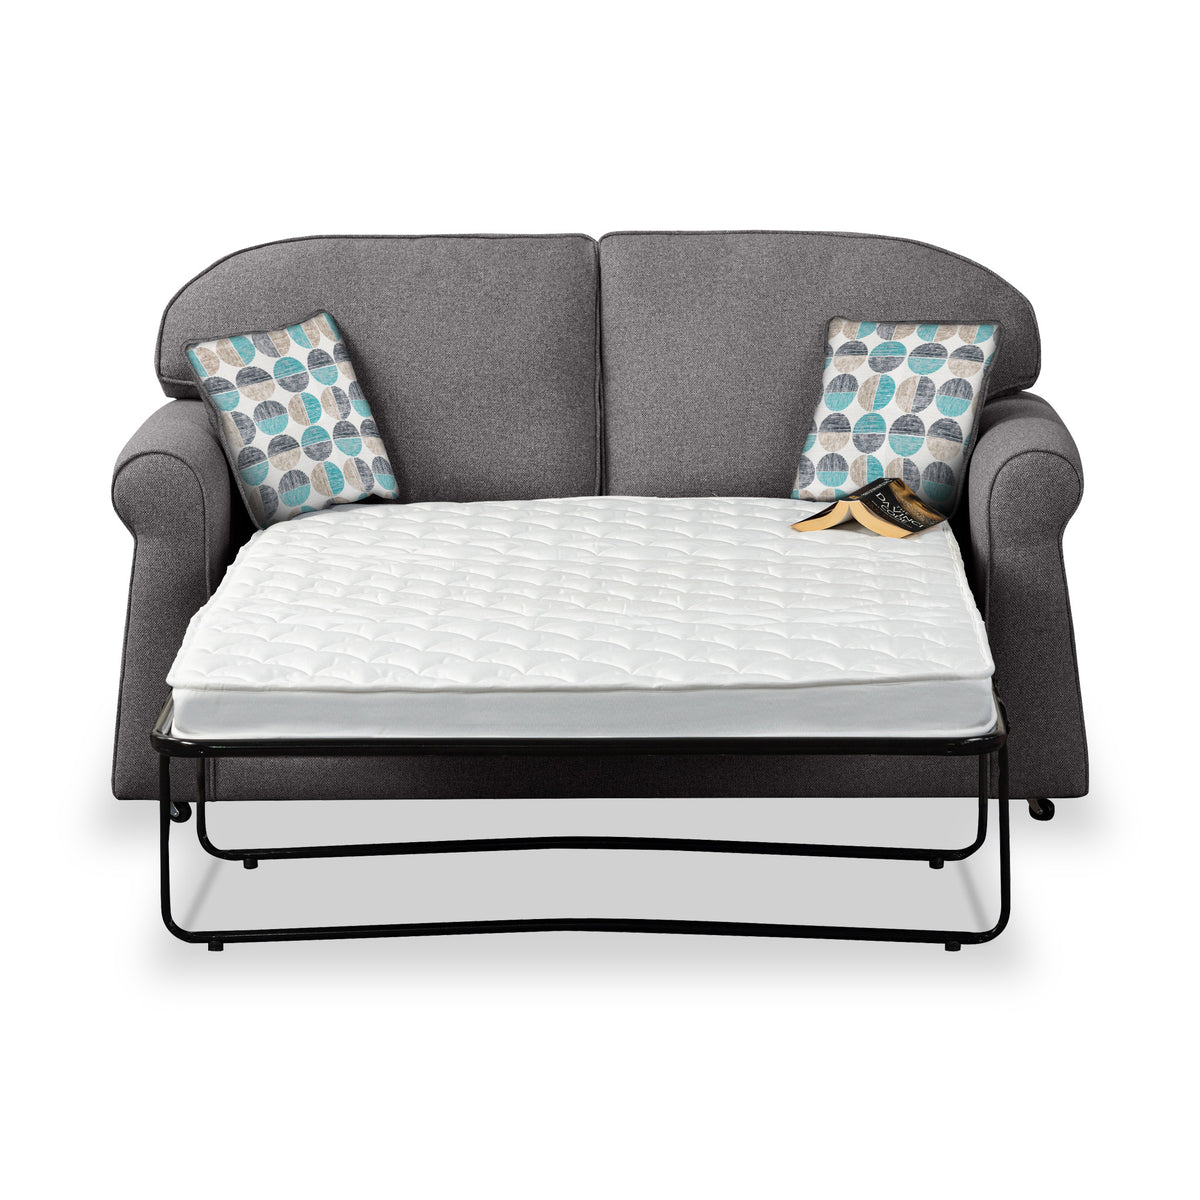 Giselle Charcoal Soft Weave 2 Seater Sofabed with Duck Egg Scatter Cushions from Roseland Furniture